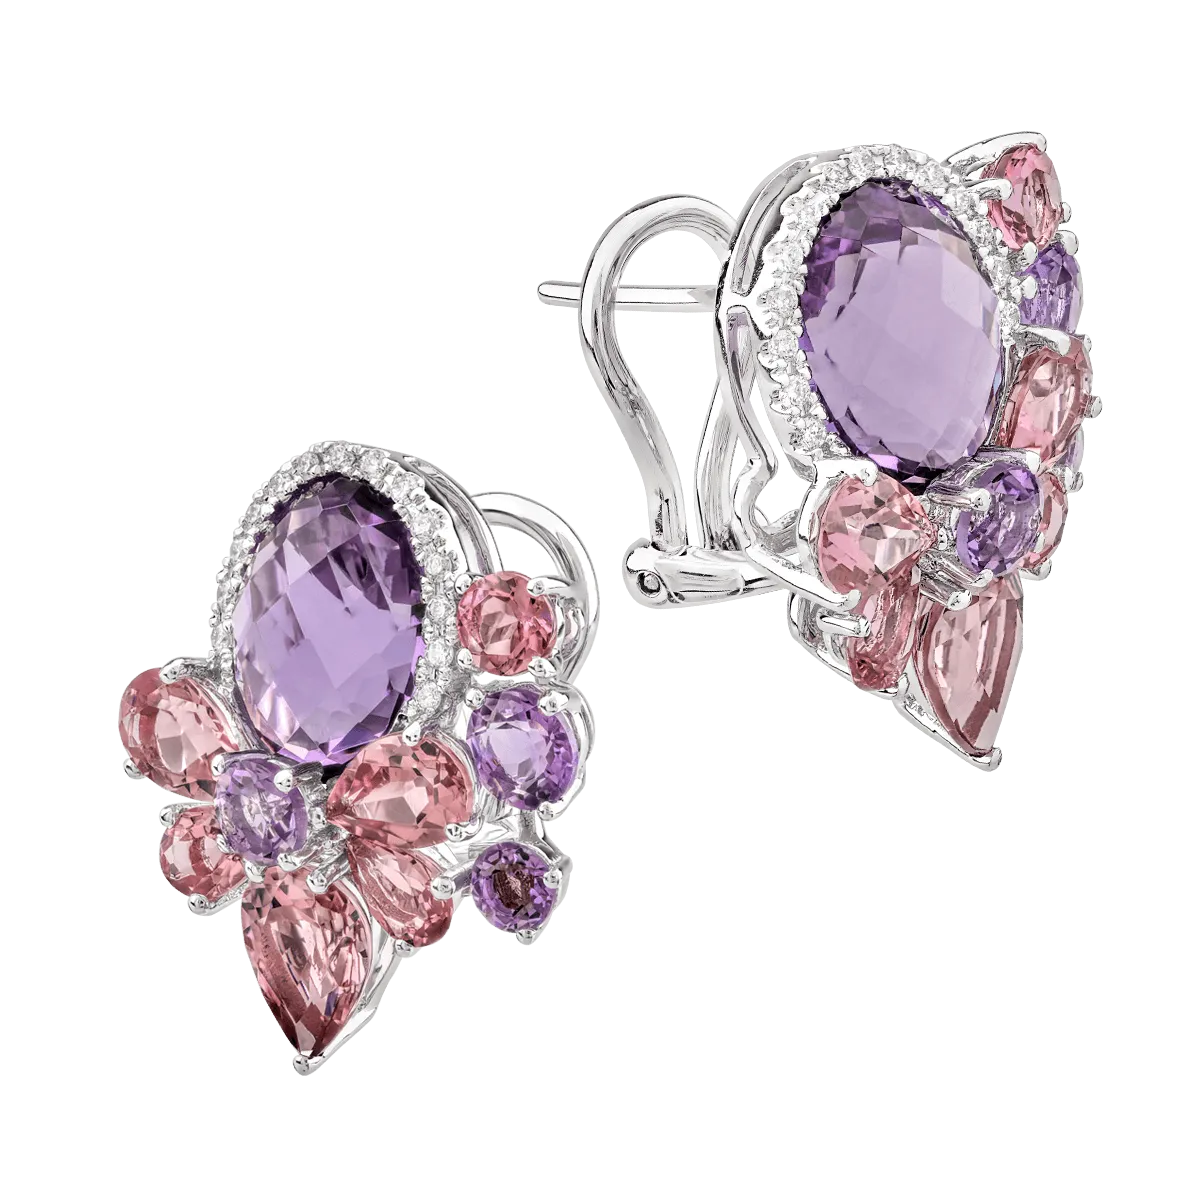 18K white gold earrings with 10.95ct precious and semiprecious stones